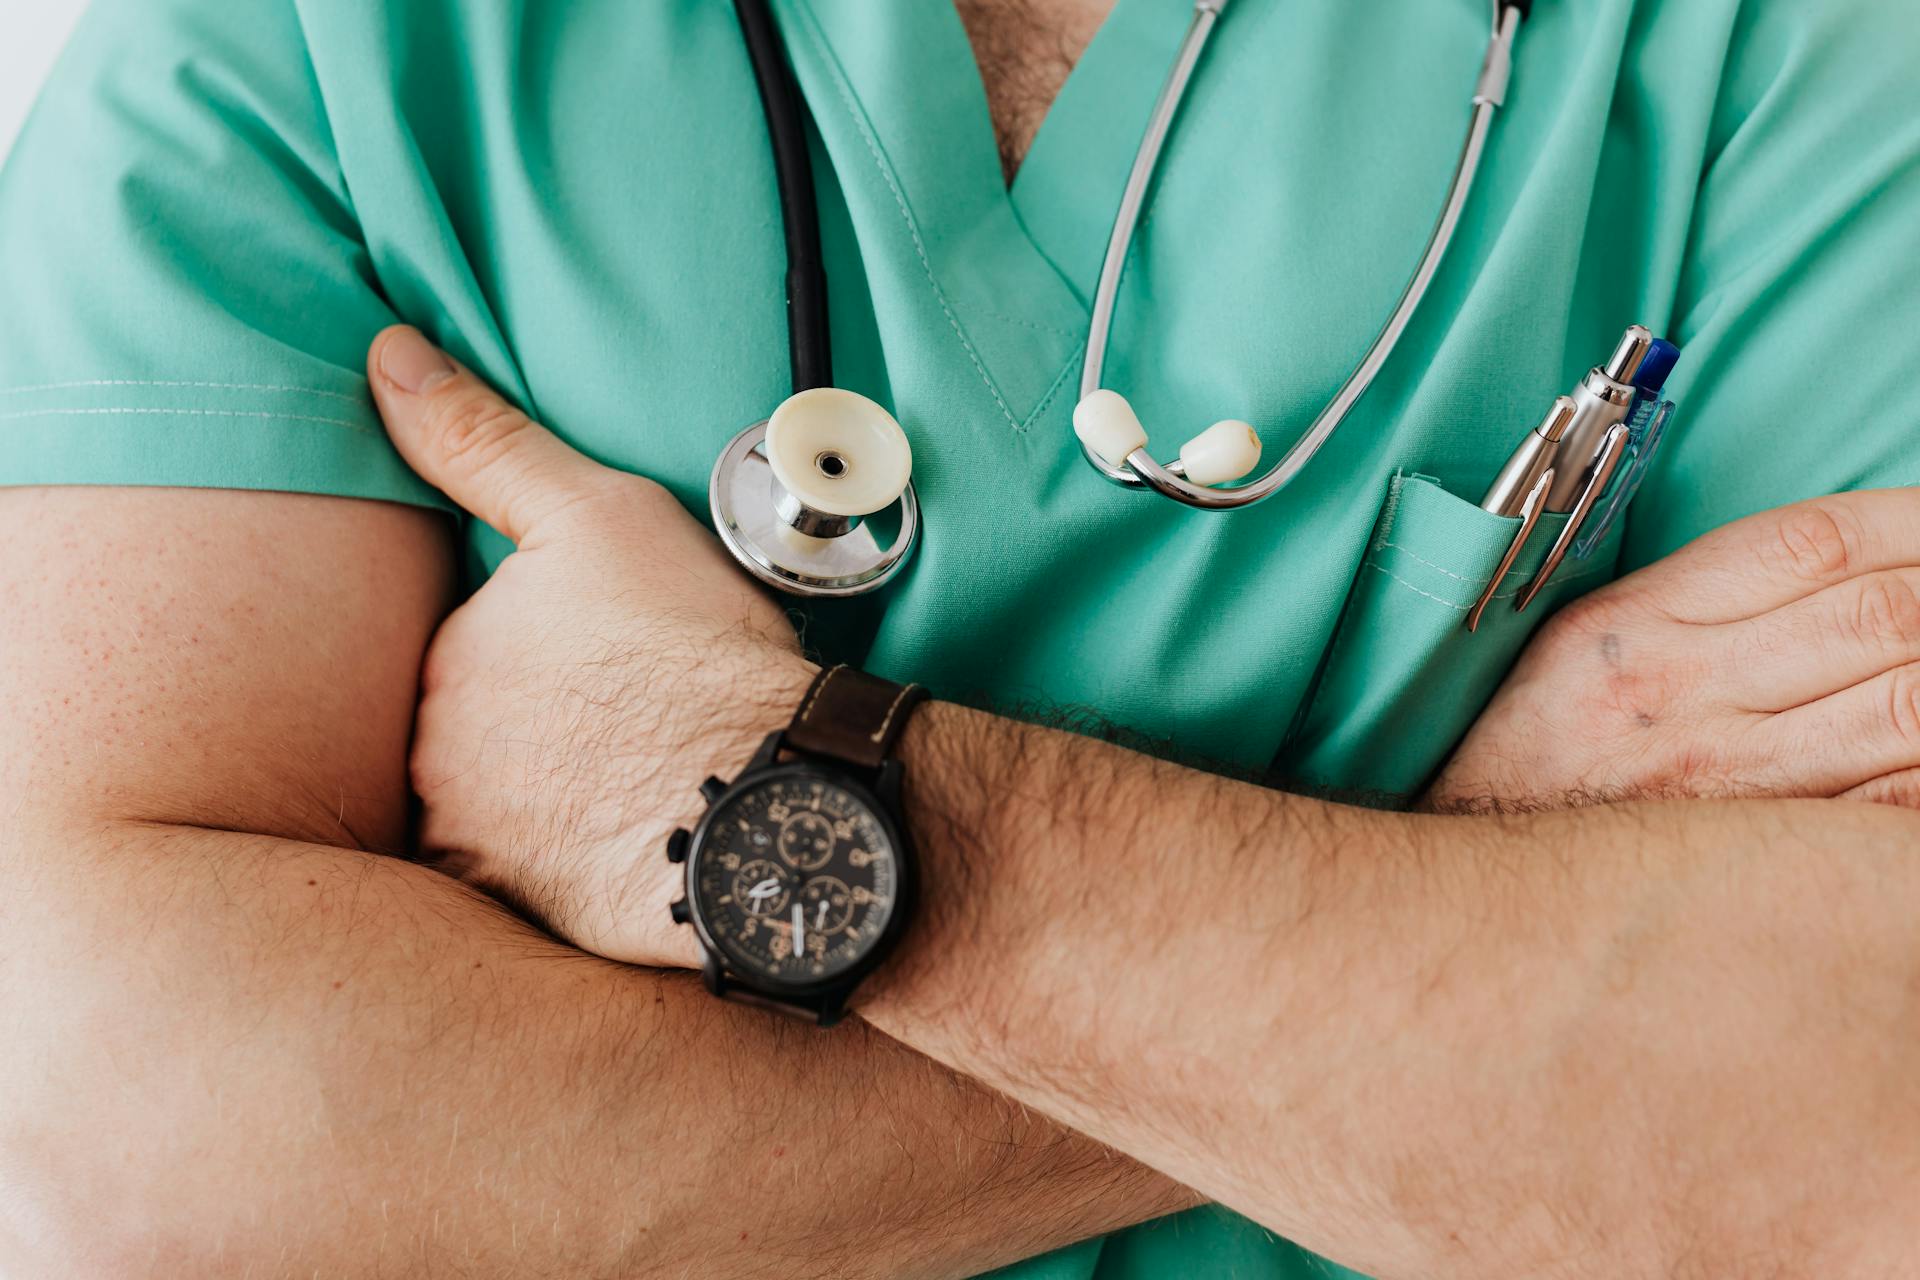 A doctor with folded arms. For illustration purposes only  | Source: Pexels